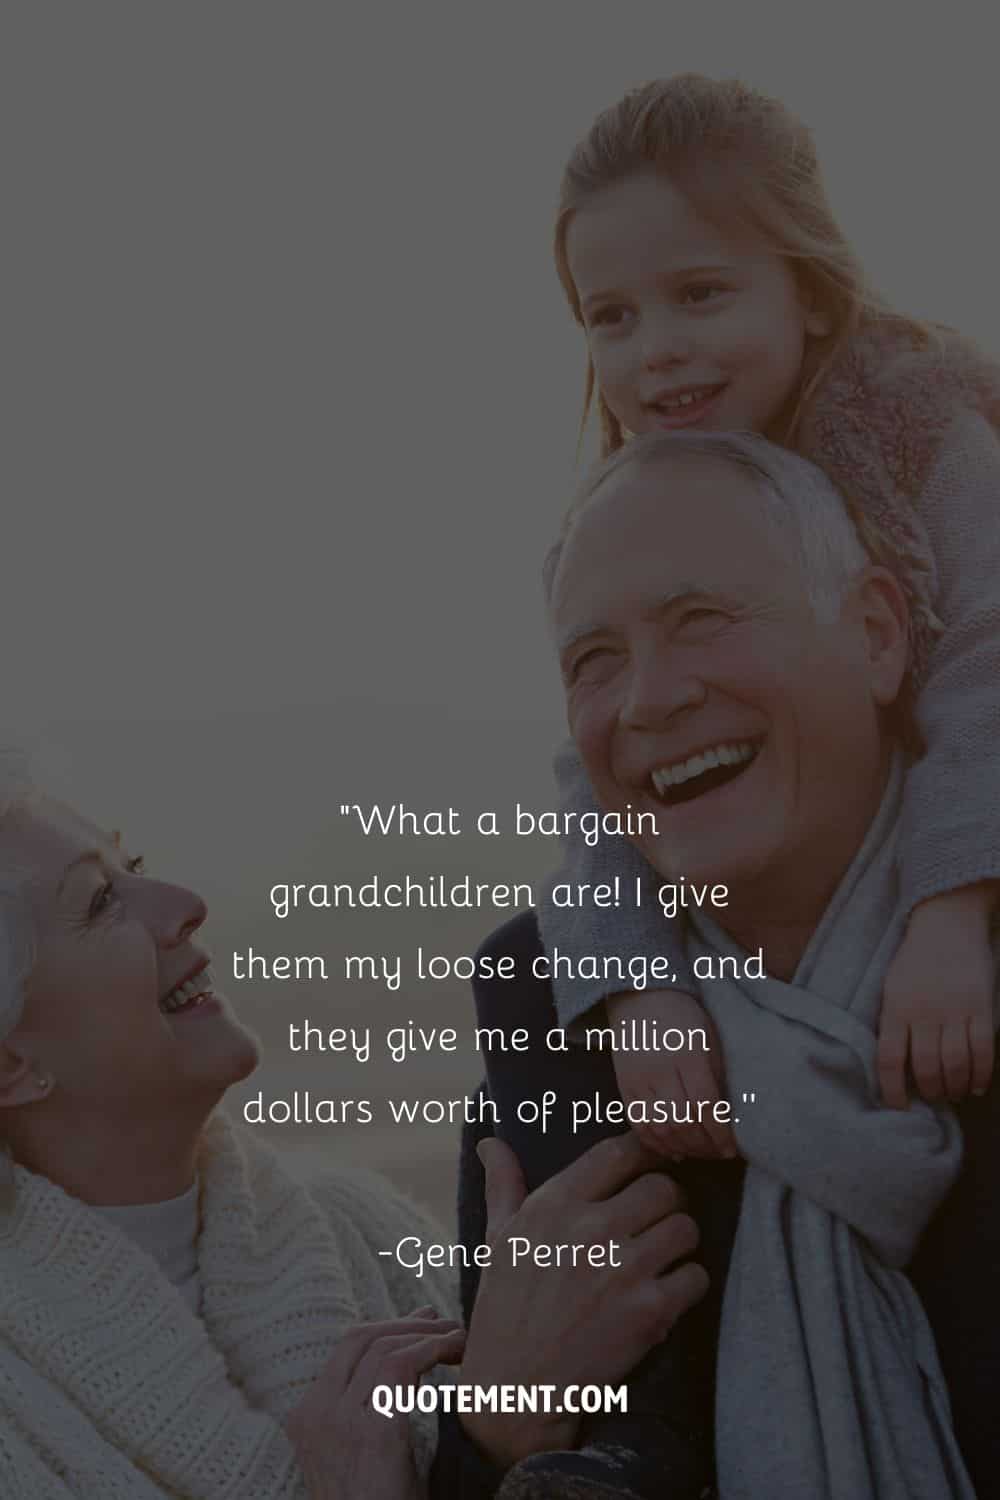 grandparent enjoying their time with granddaughter representing the greatest grandchildren quote